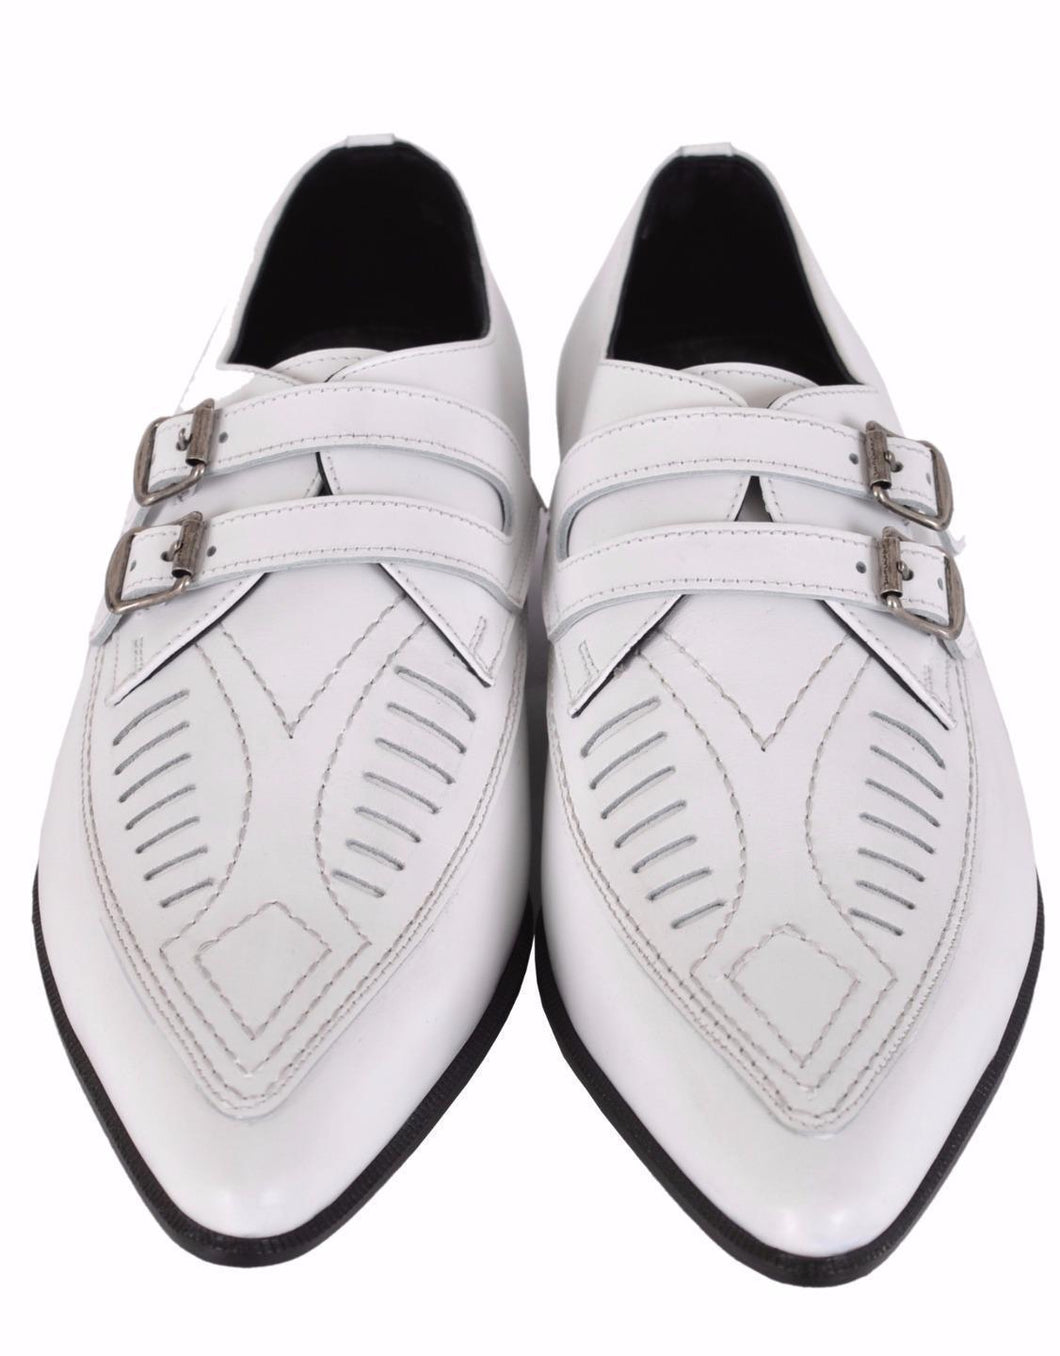 New Handmade Men's White Leather Duckies Monk Strap Loafer Shoes